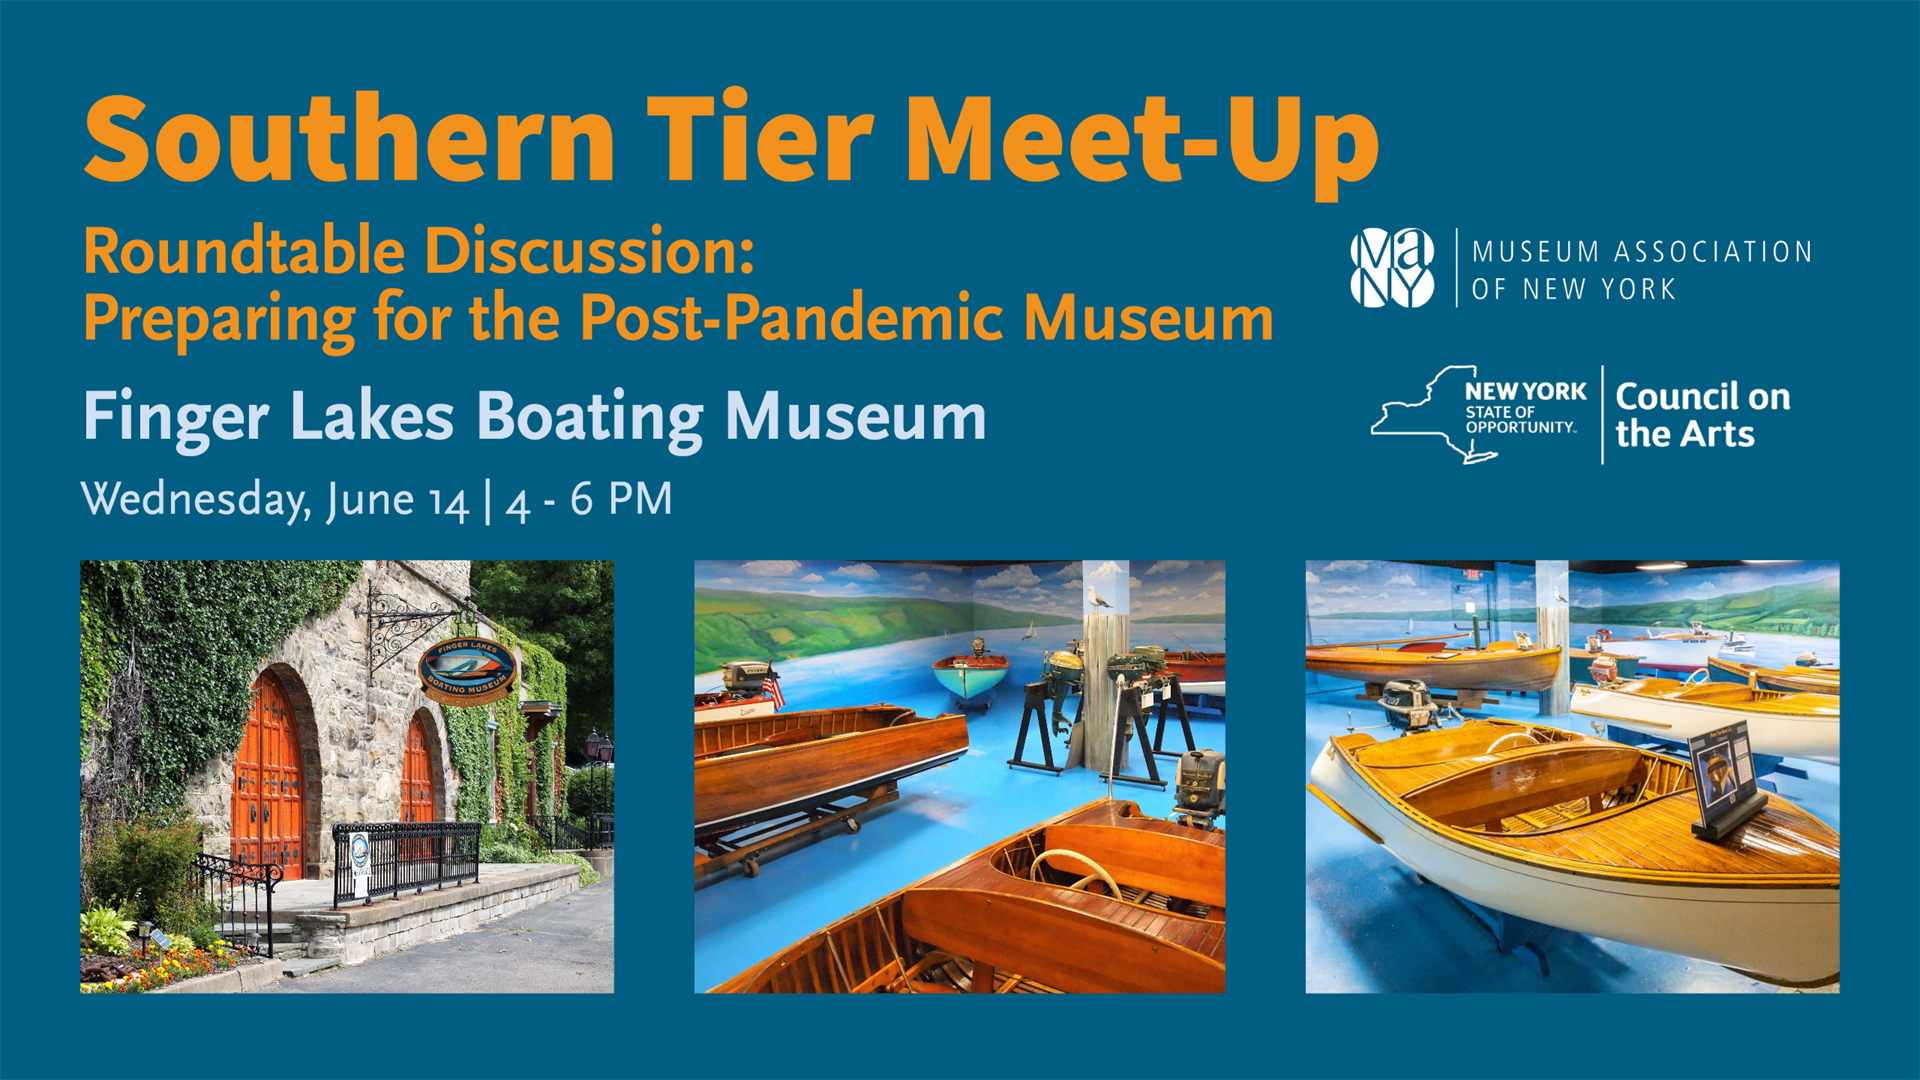 Southern Tier Meet-Up and Roundtable Discussion at the Finger Lakes Boating Museum, June 14 from 4 to 6 PM